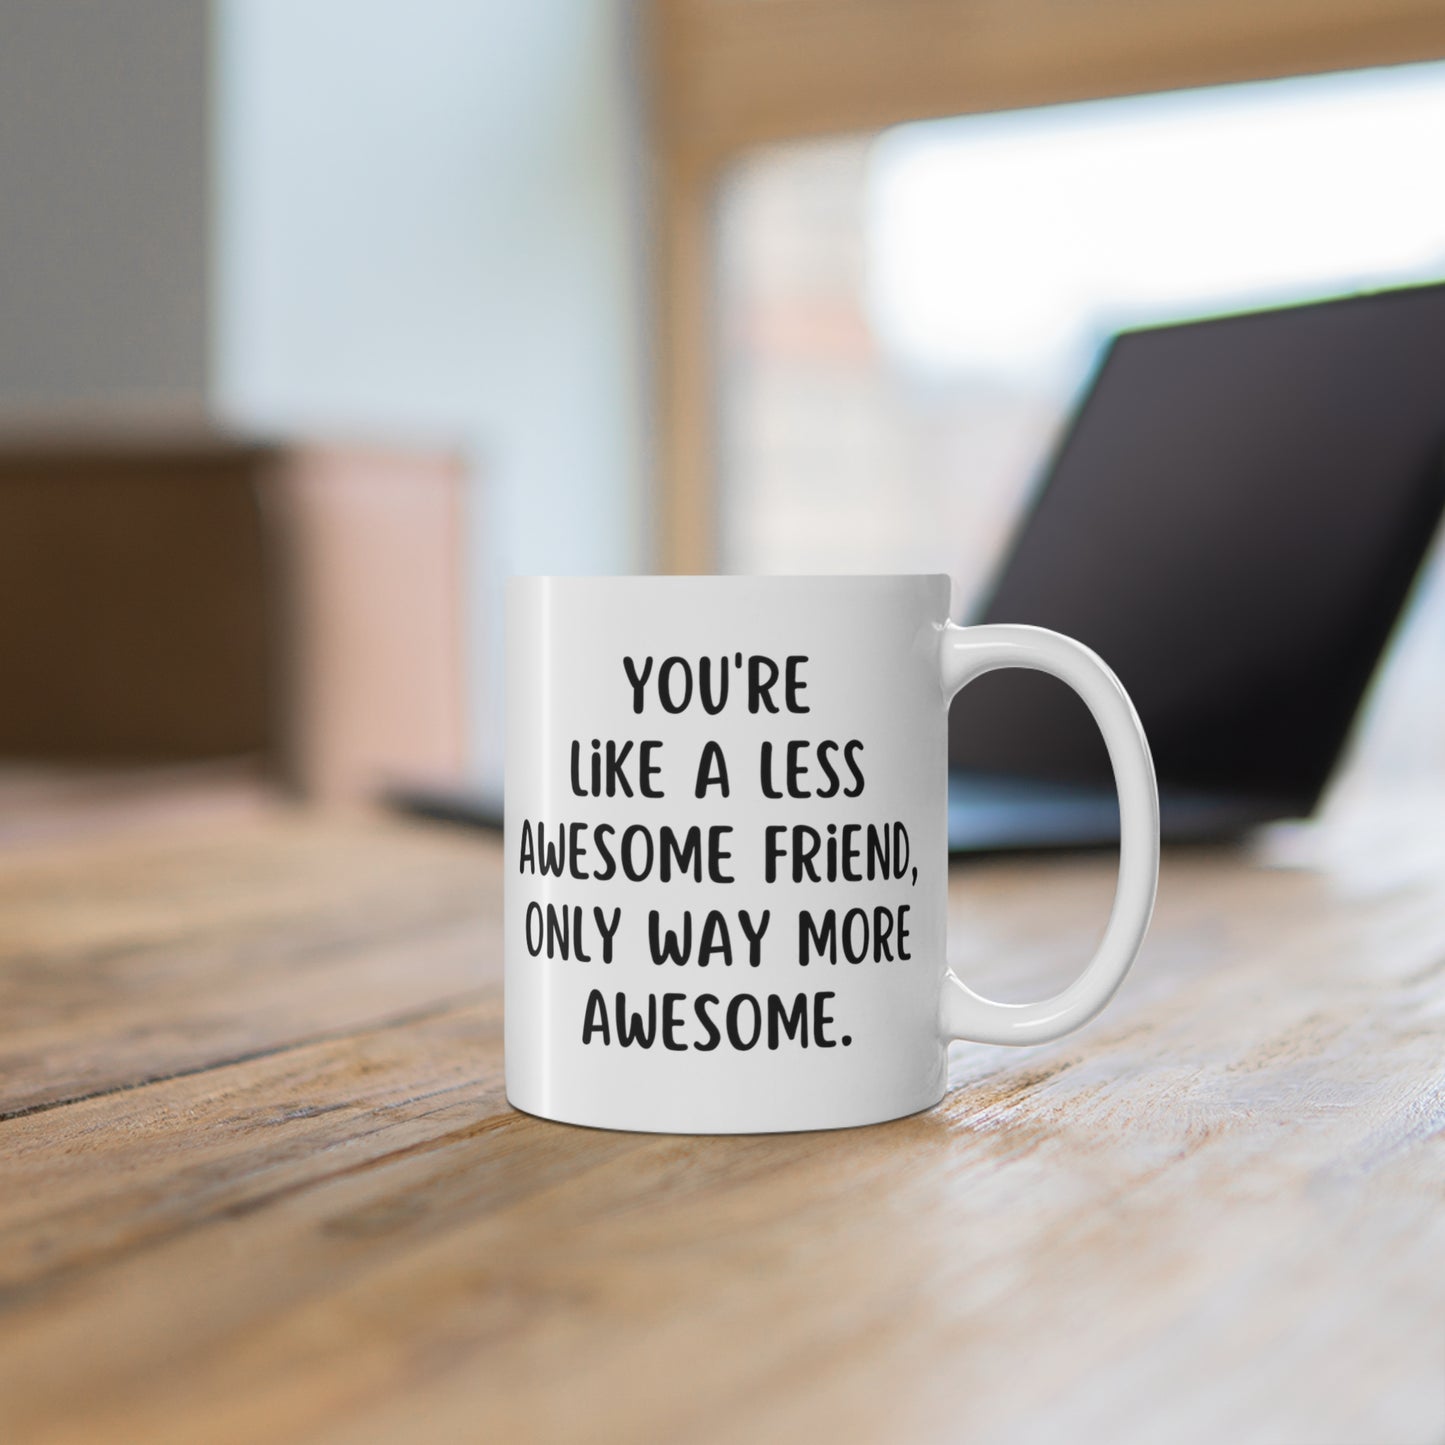 You're Like A Less Awesome Friend, Only Way More Awesome | Funny, Snarky Gift | White Ceramic Mug, Fun Block Font